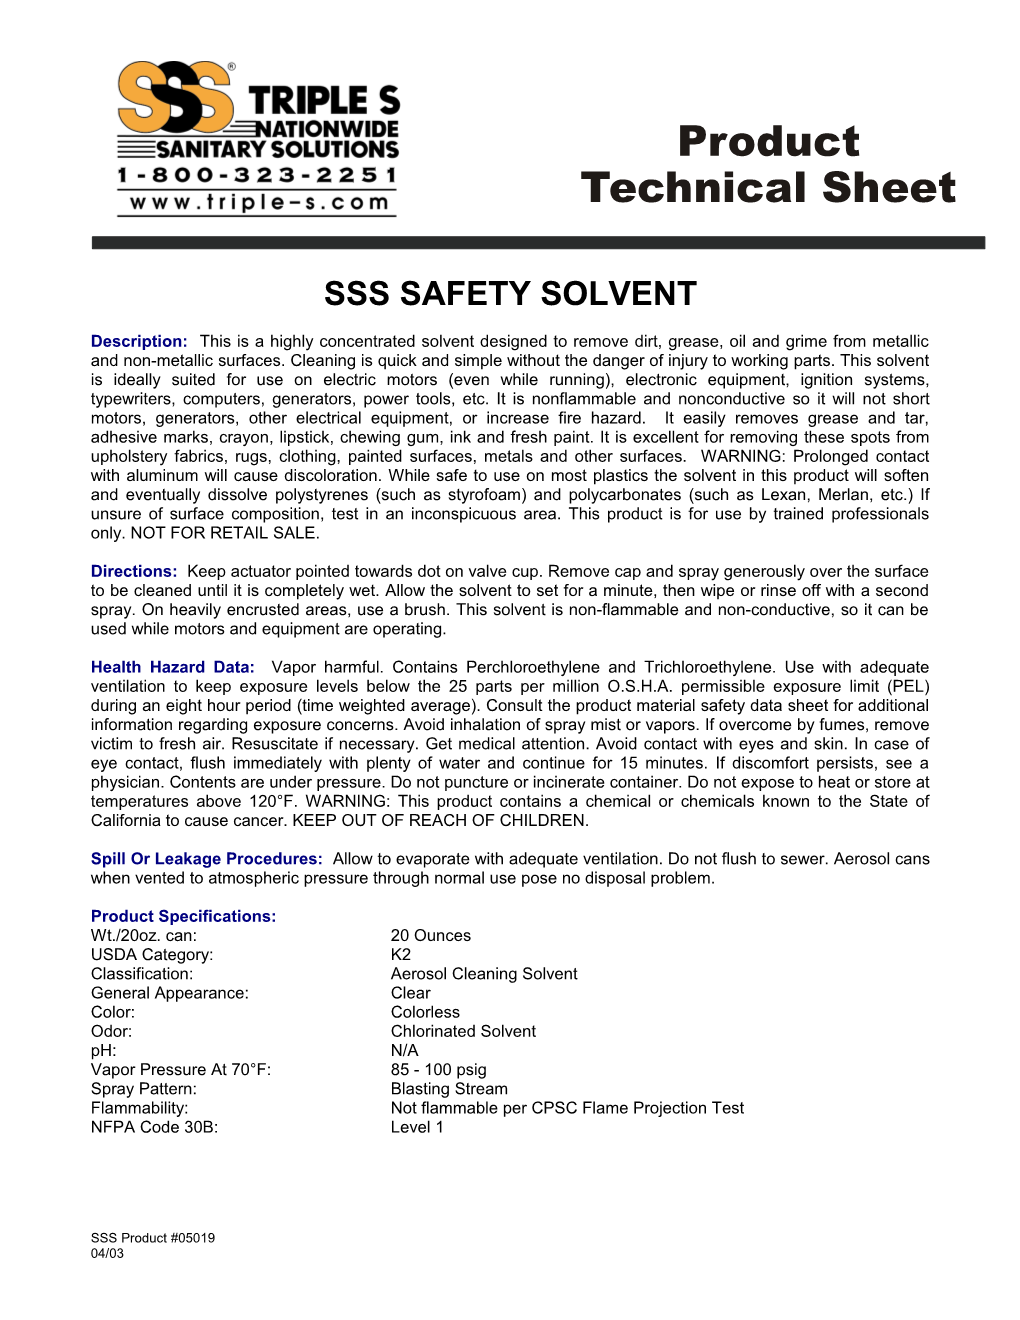 Sss Safety Solvent